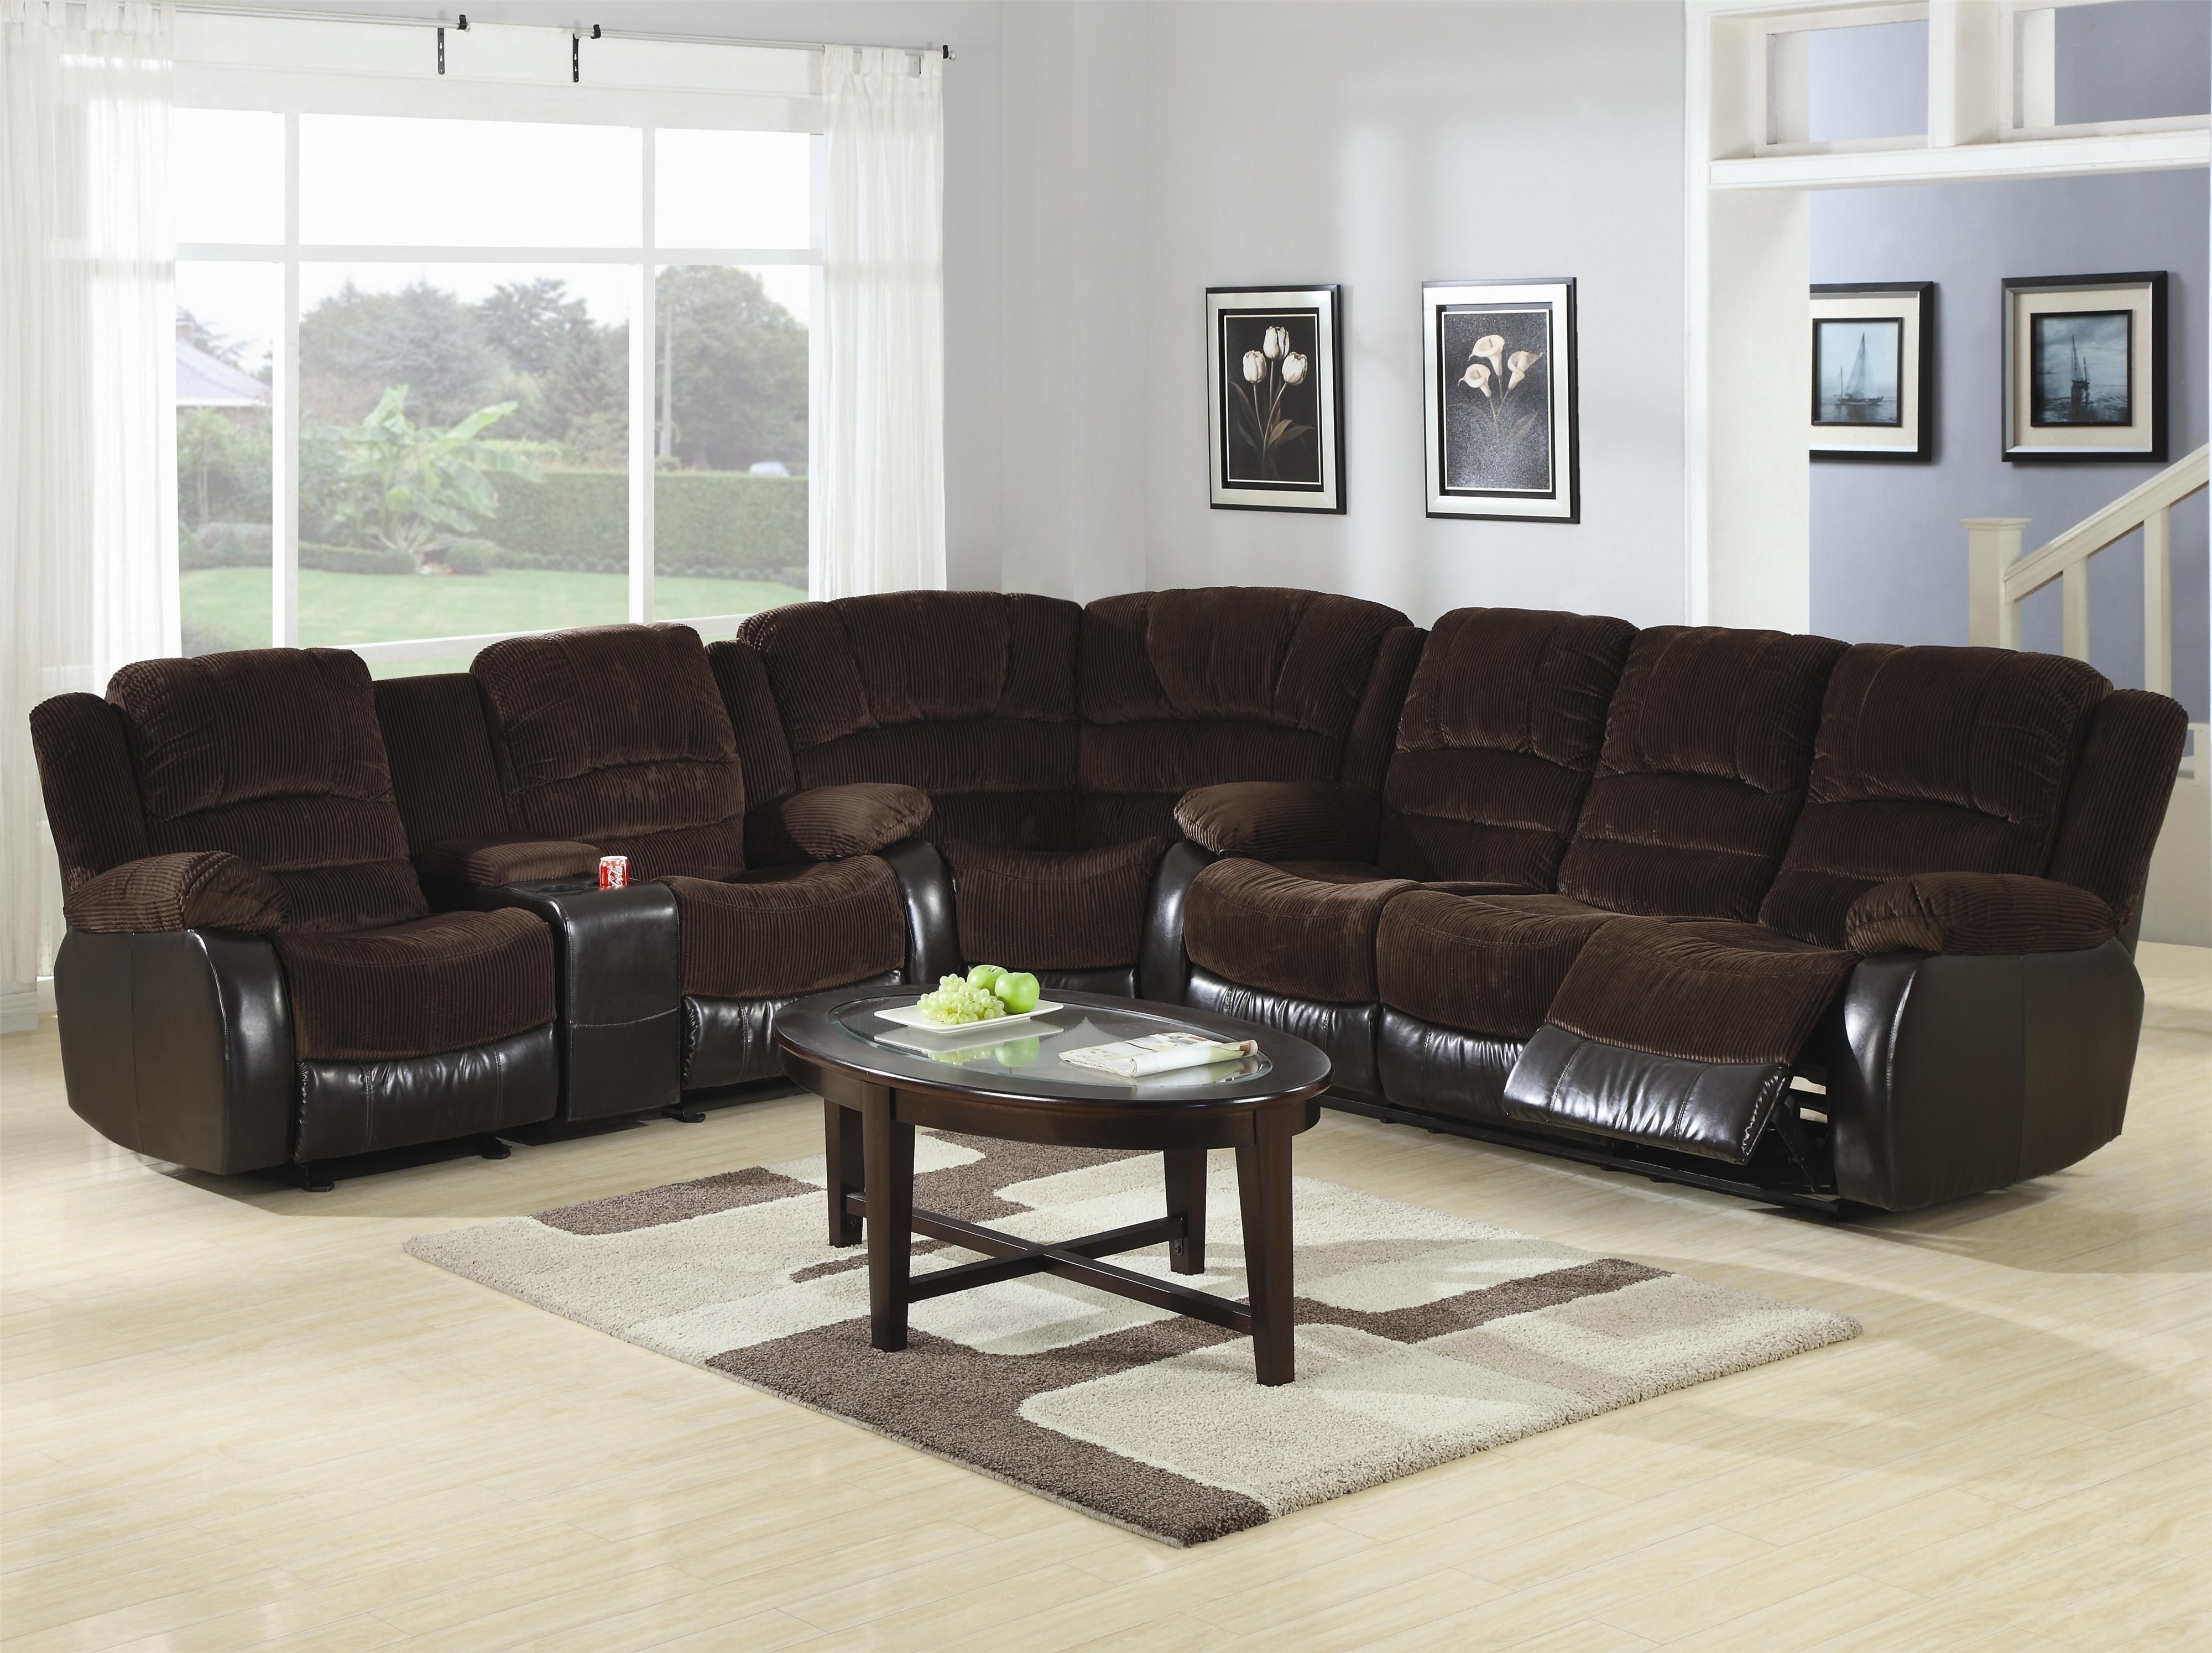 Most Recently Released Sofa : Amazing Braxton Sectional Sofa Beautiful Home Design Intended For Braxton Sectional Sofas (View 7 of 15)